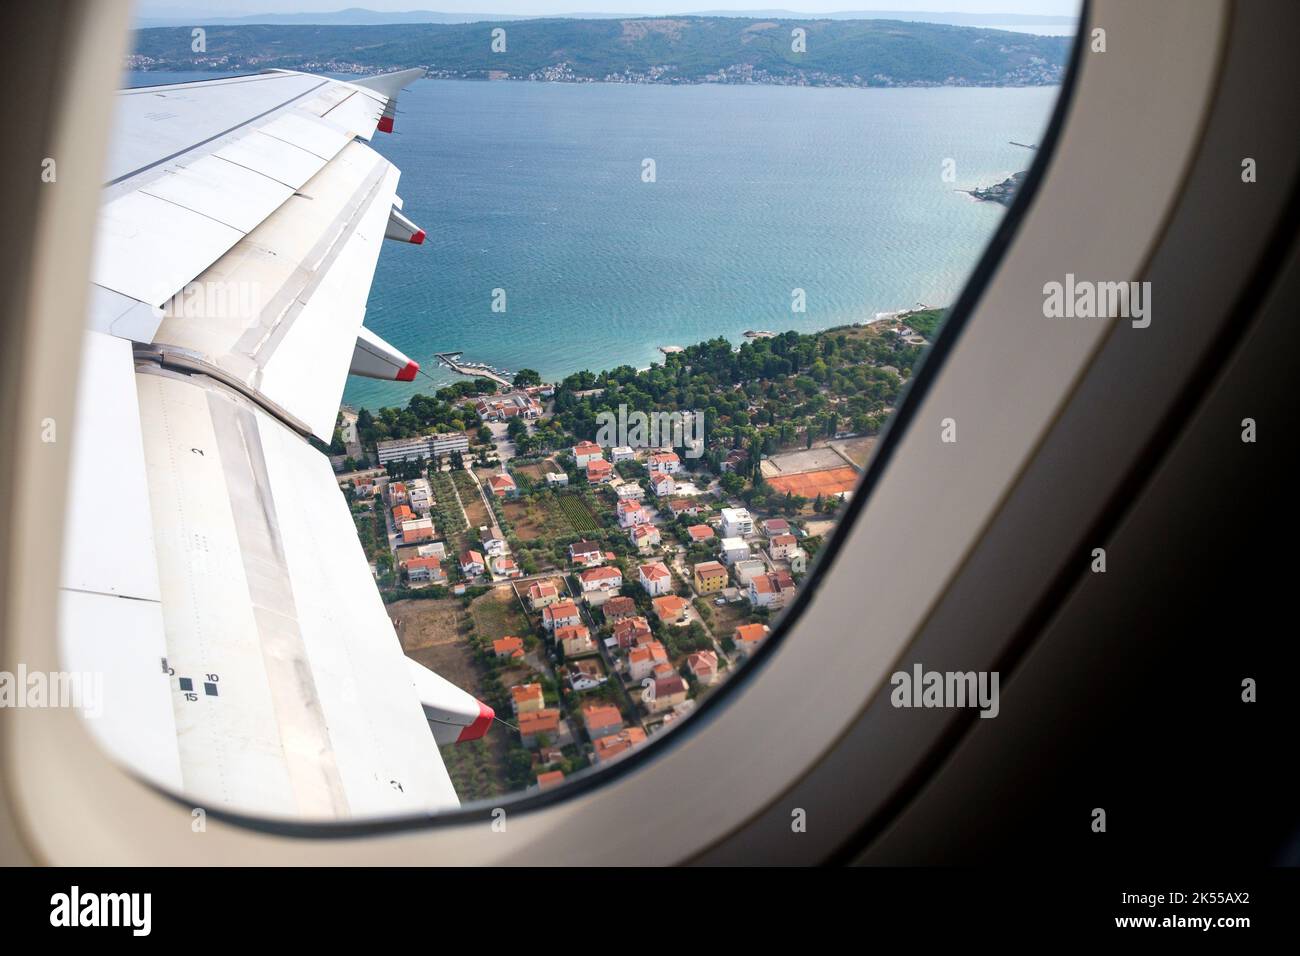 Looking out of the window of an aeroplane at the wing during take off from Split airport in Croatia. Stock Photo